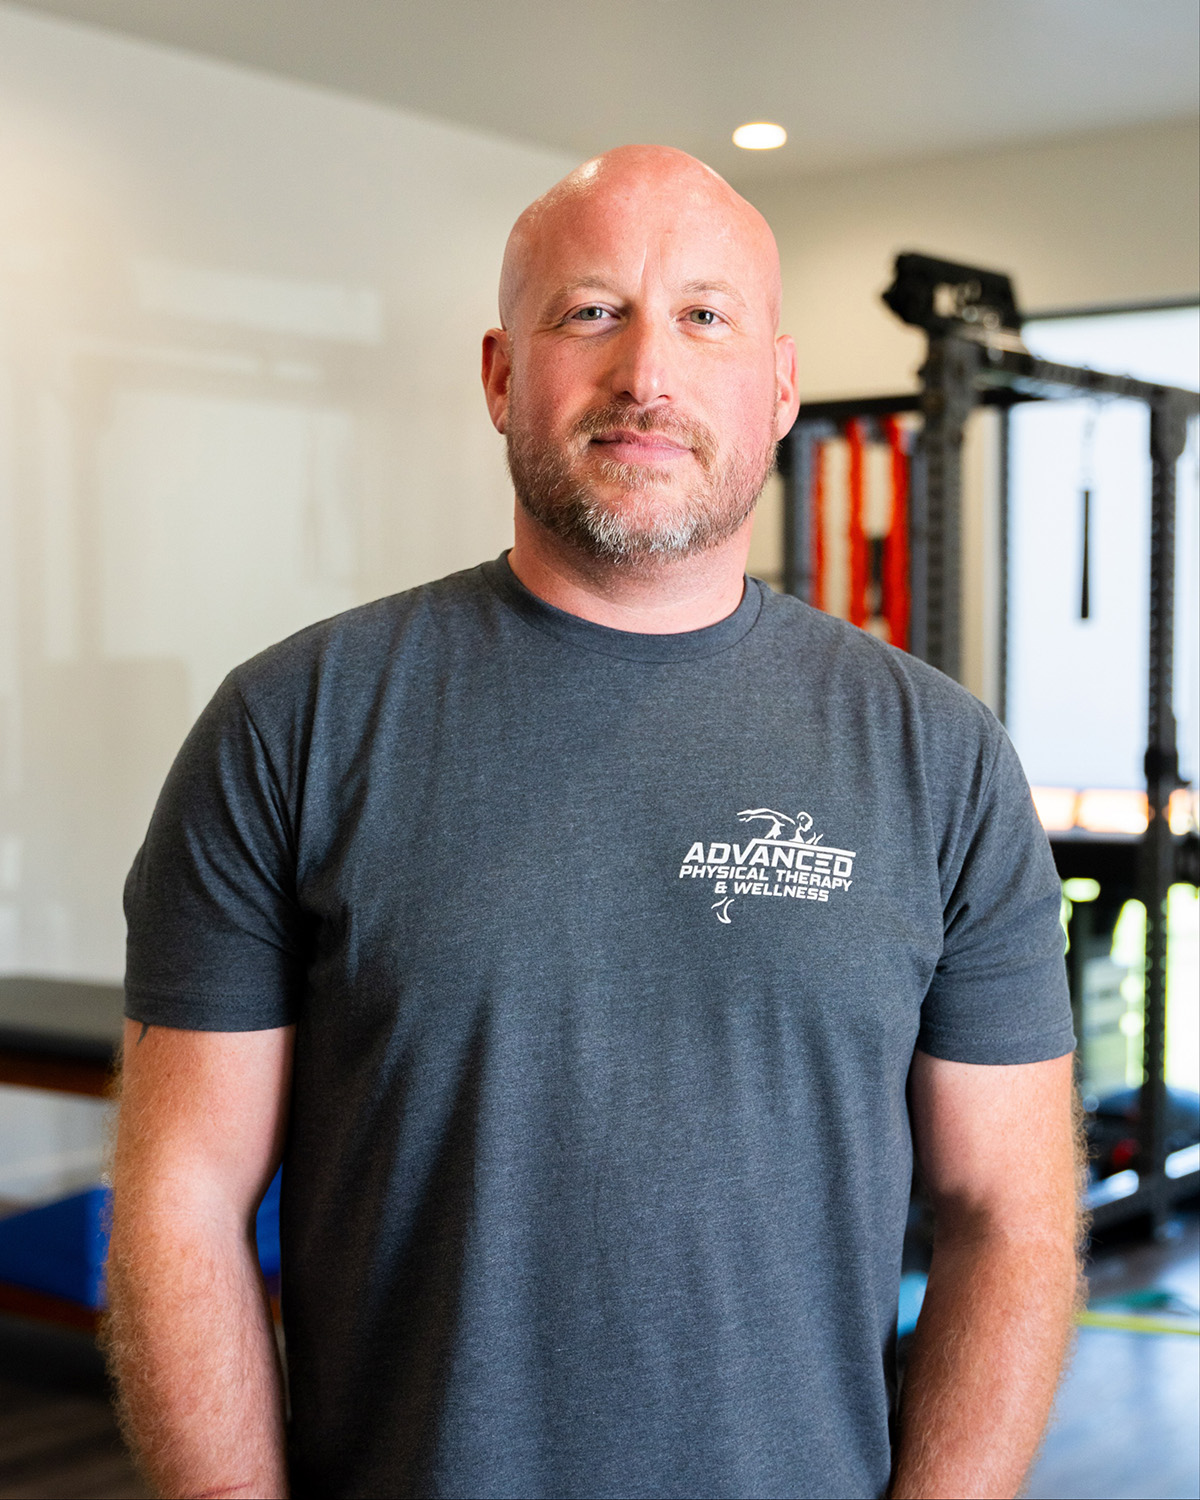 Brad Veal, owner and founder of Advanced Physical Therapy & Wellness.